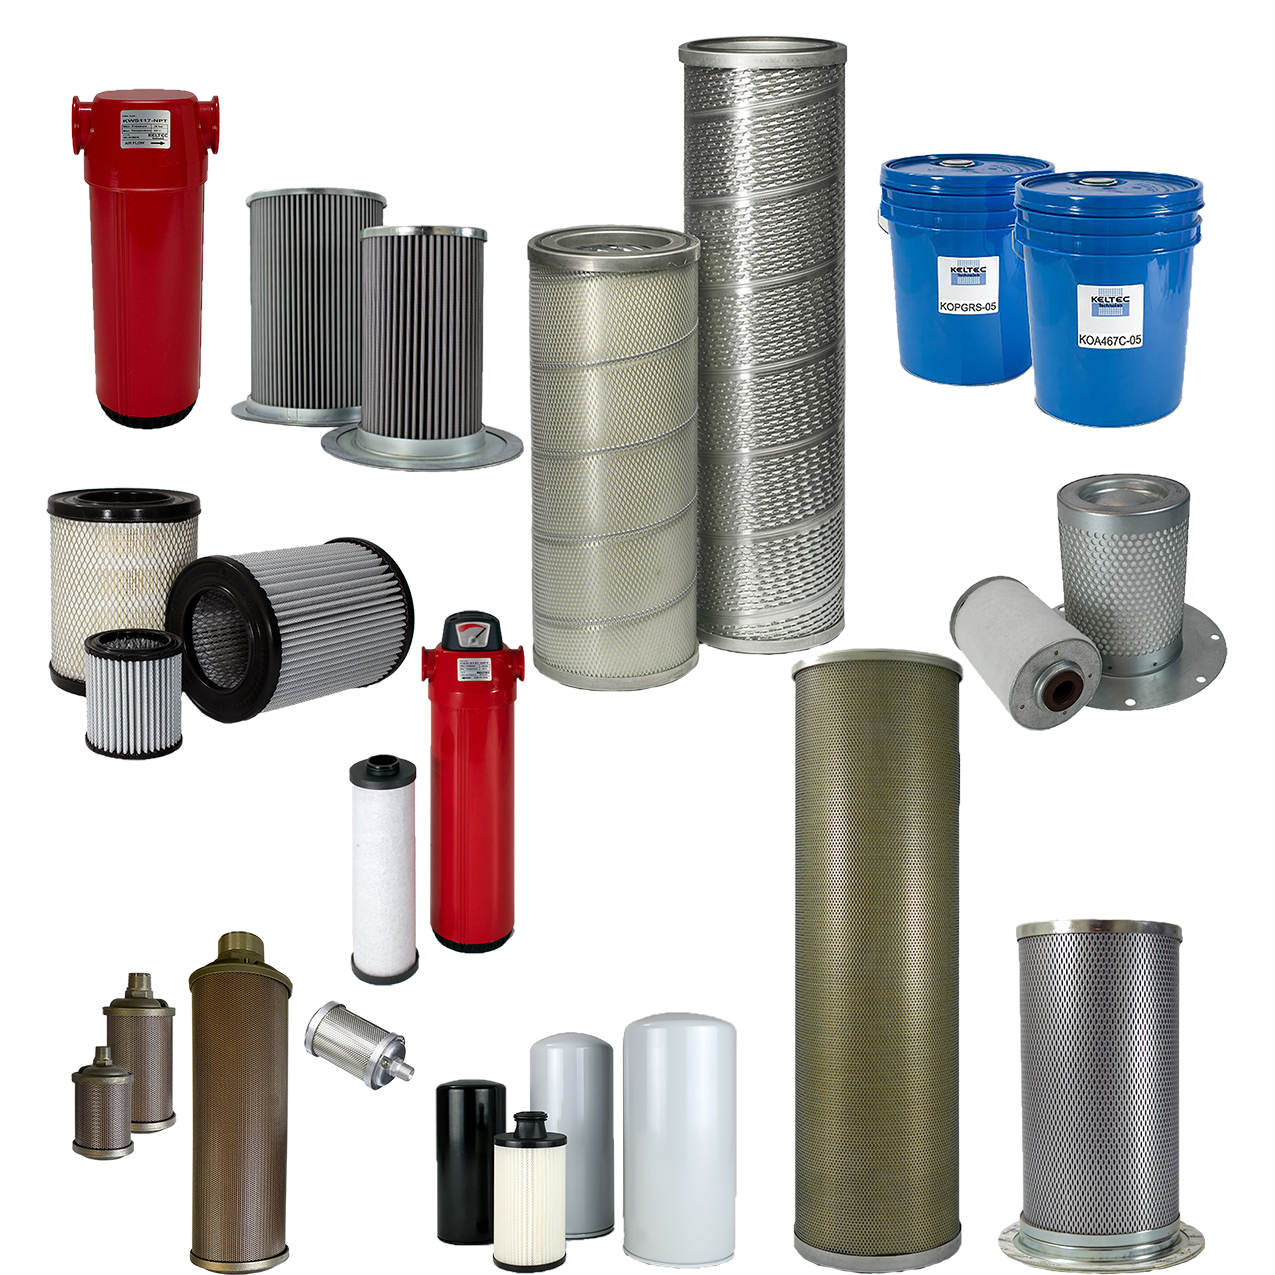 A Group of Keltec Products